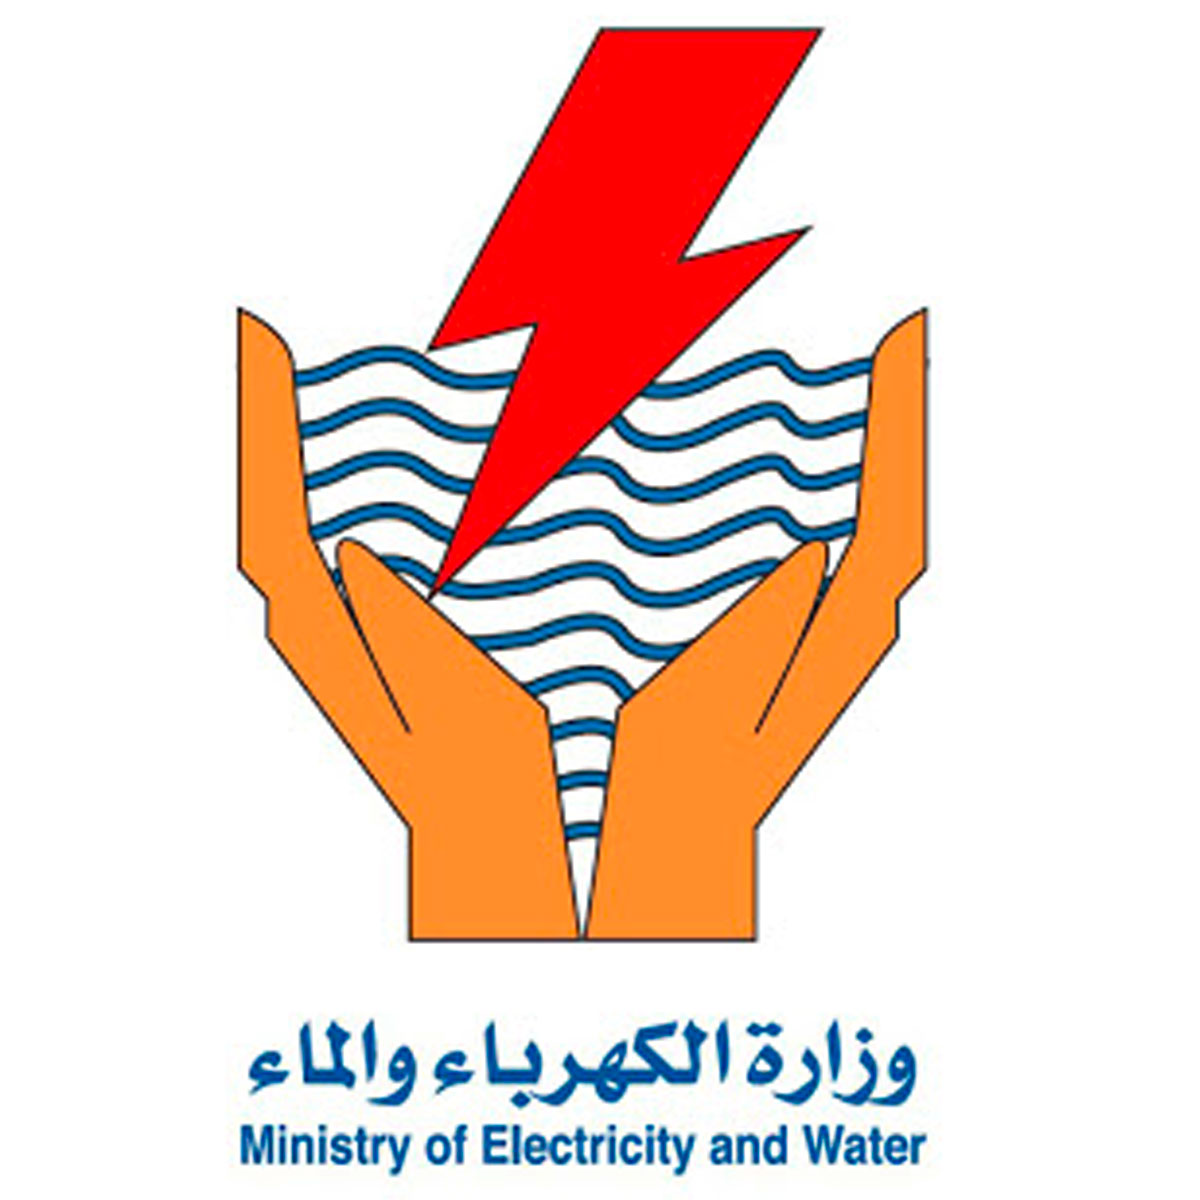 Ministry of Electricity and Water: SCAM's Institutional Customer